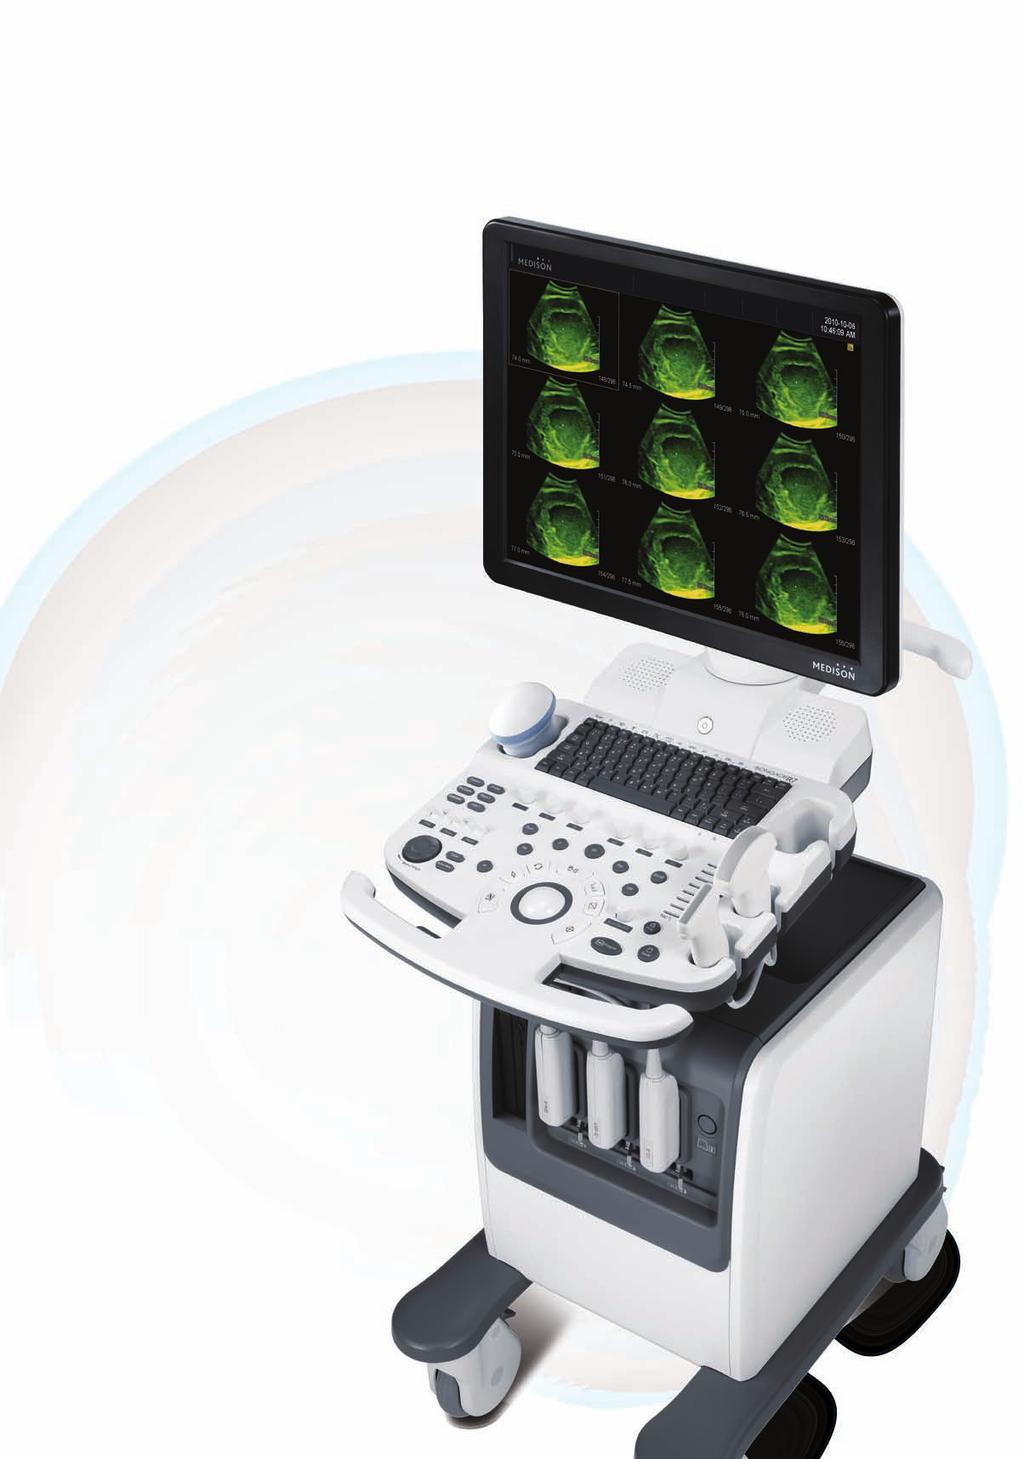 ACCURATE AND EASY DIAGNOSIS RE-DEFINED The SonoAce R7, with Samsung